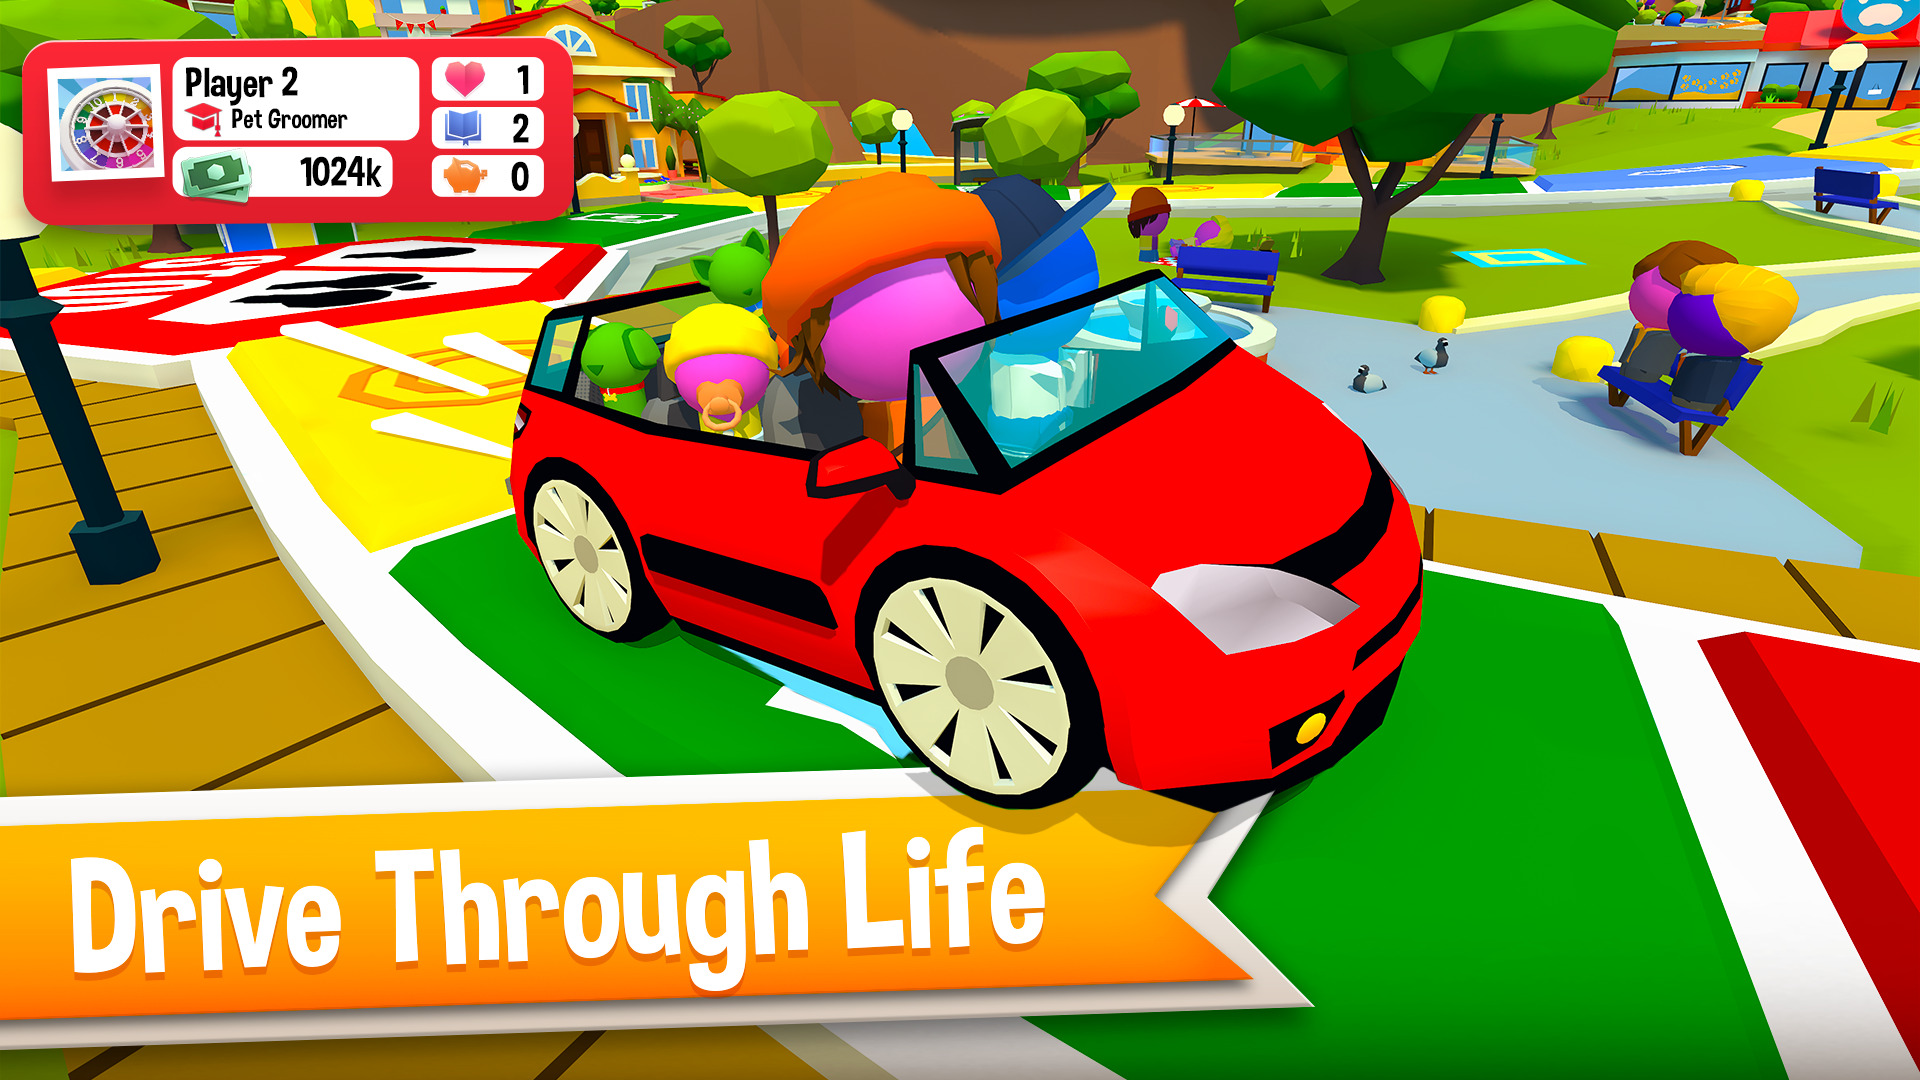 THE GAME OF LIFE 2 - OUT NOW on Mobile - Watch the Official Trailer! 